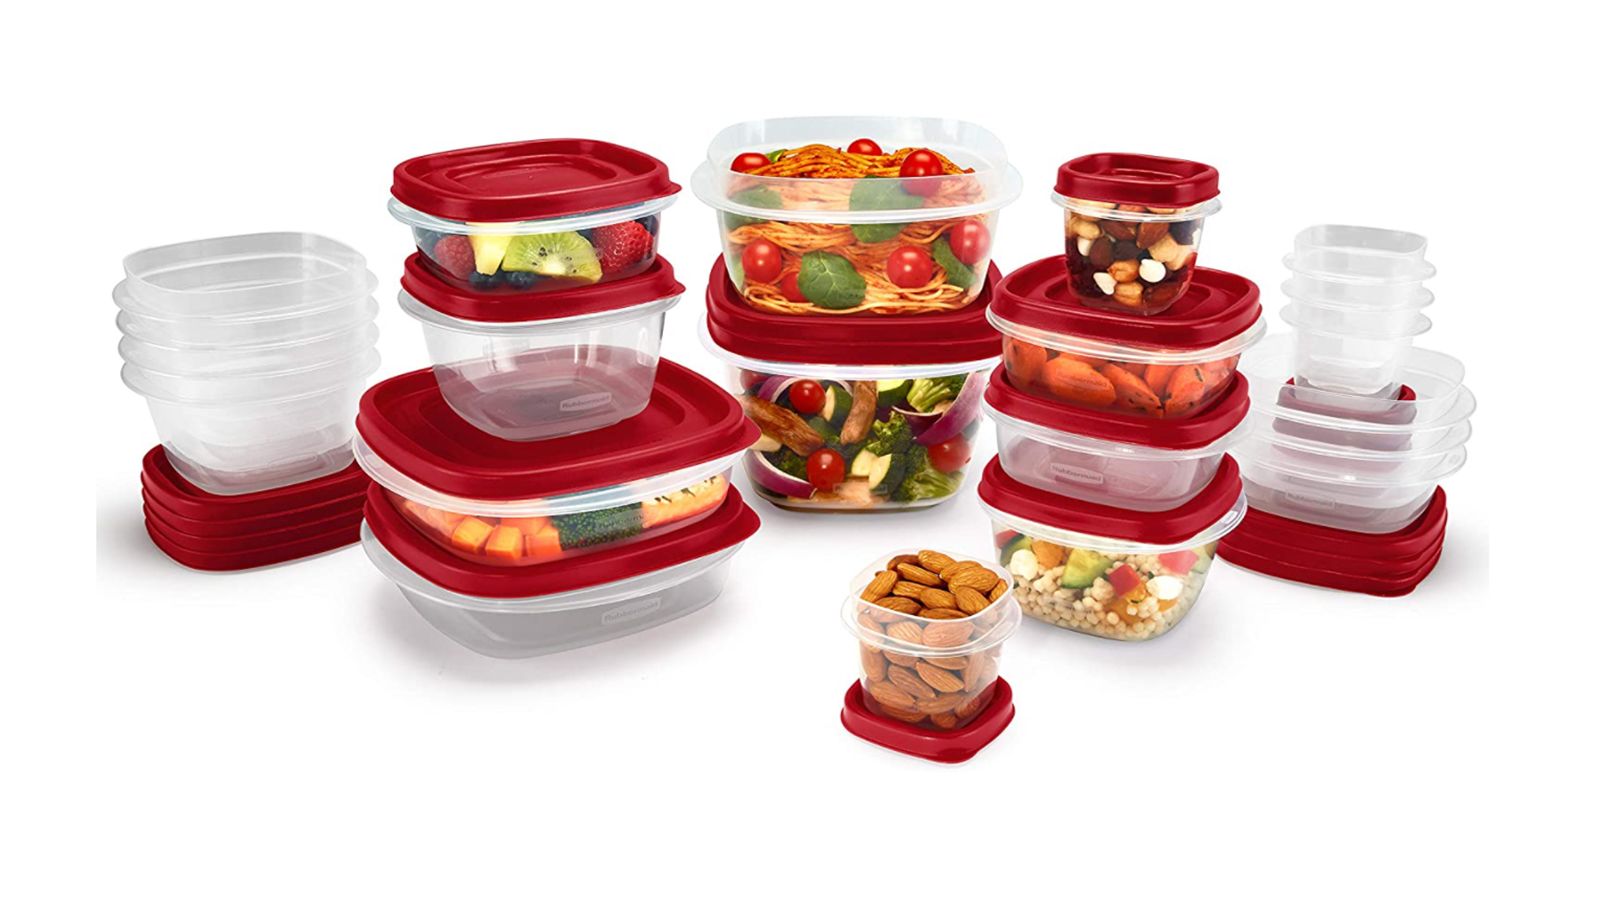 https://media.cnn.com/api/v1/images/stellar/prod/210930103733-best-meal-prep-containers-rubbermaid-easy-find-vented-lids-food-storage-containers-set-of-21.jpg?q=w_1600,h_901,x_0,y_0,c_fill